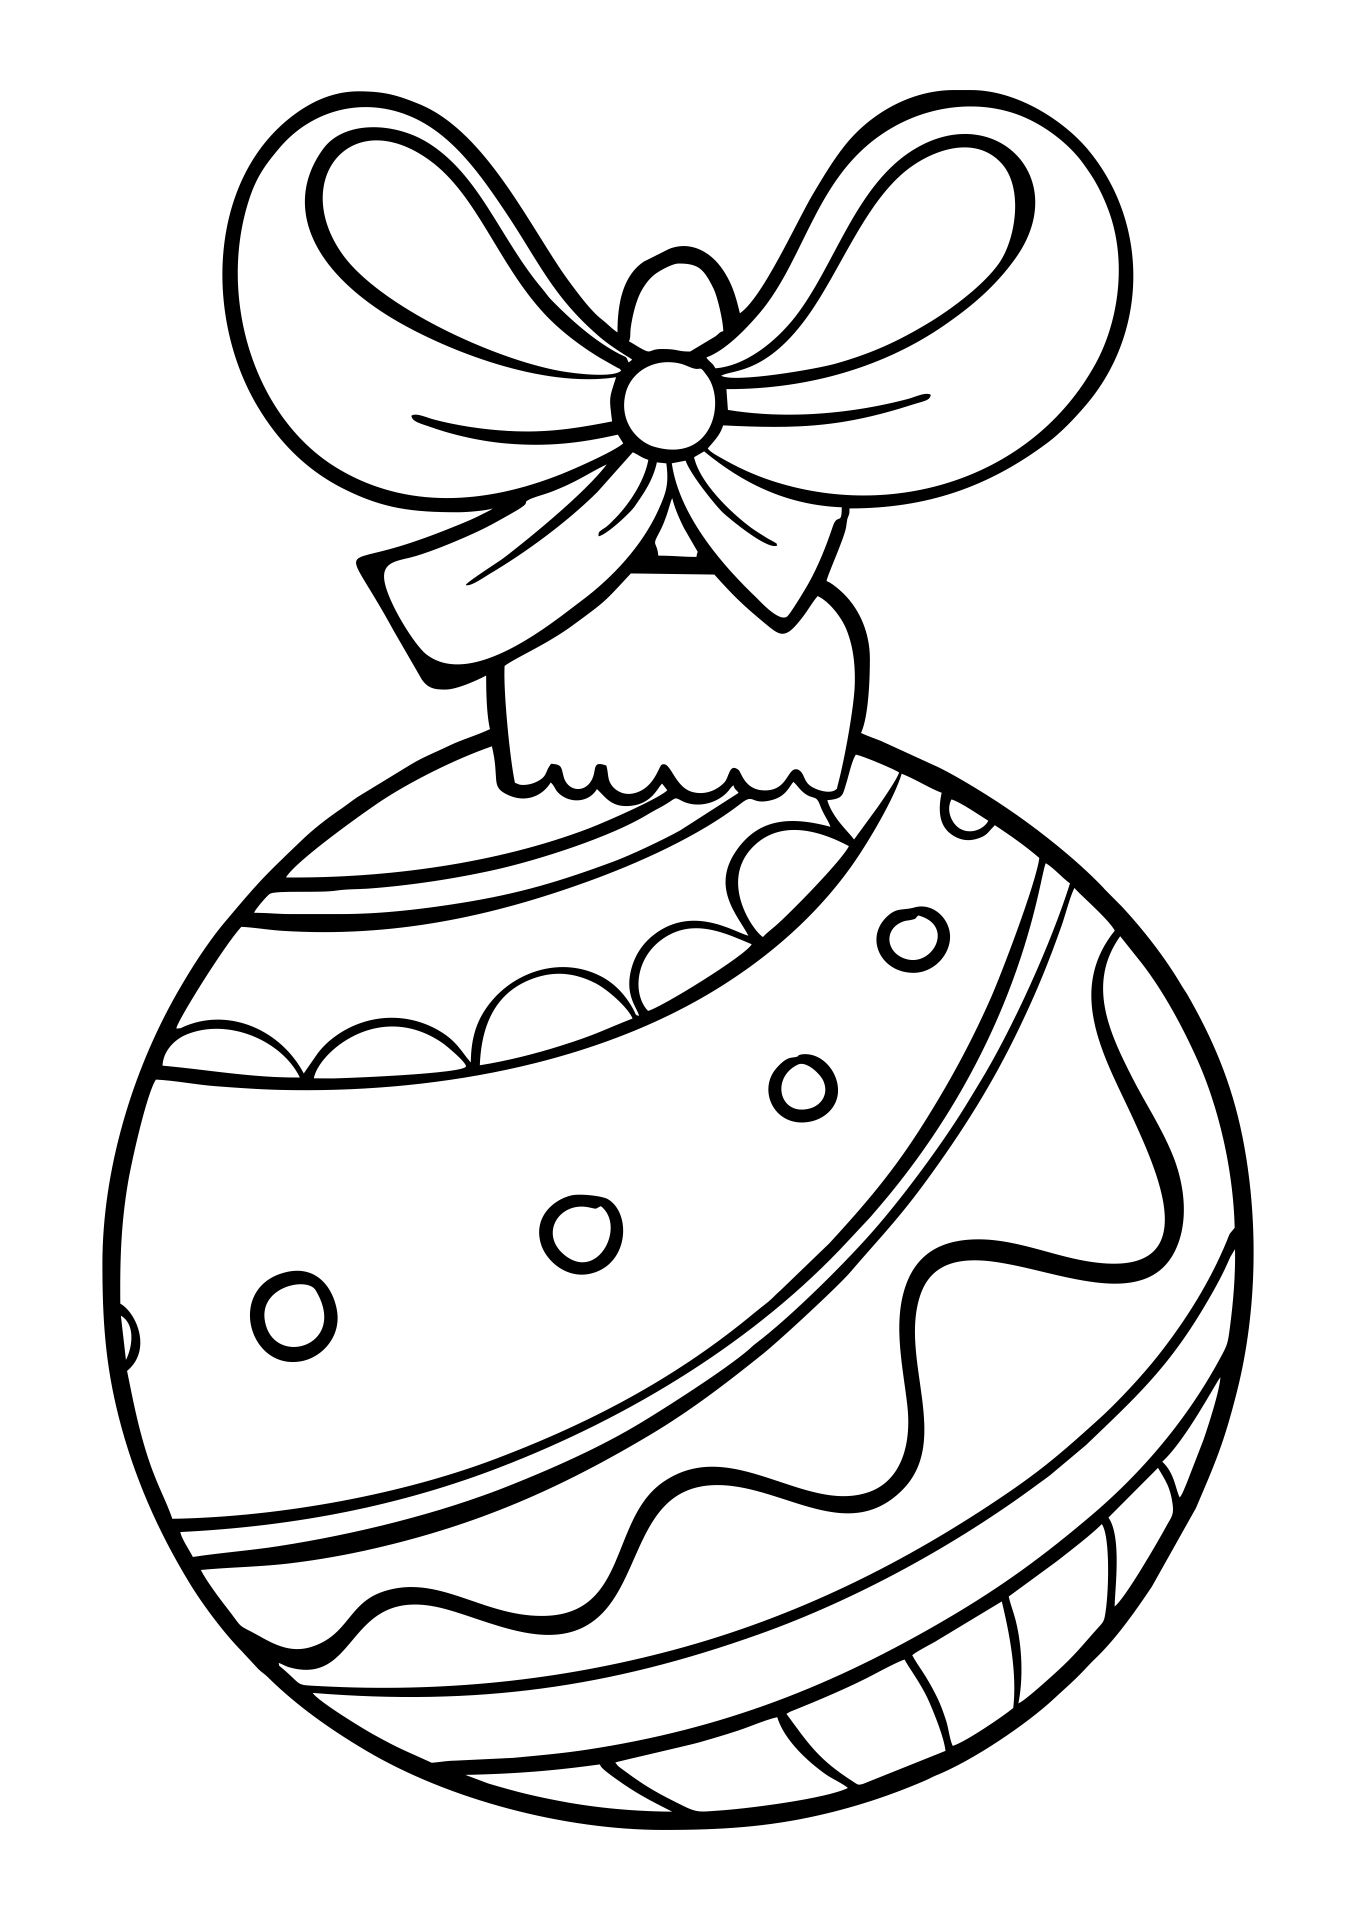 7 Best Images of Free Christmas Printable Ornament Coloring Pages